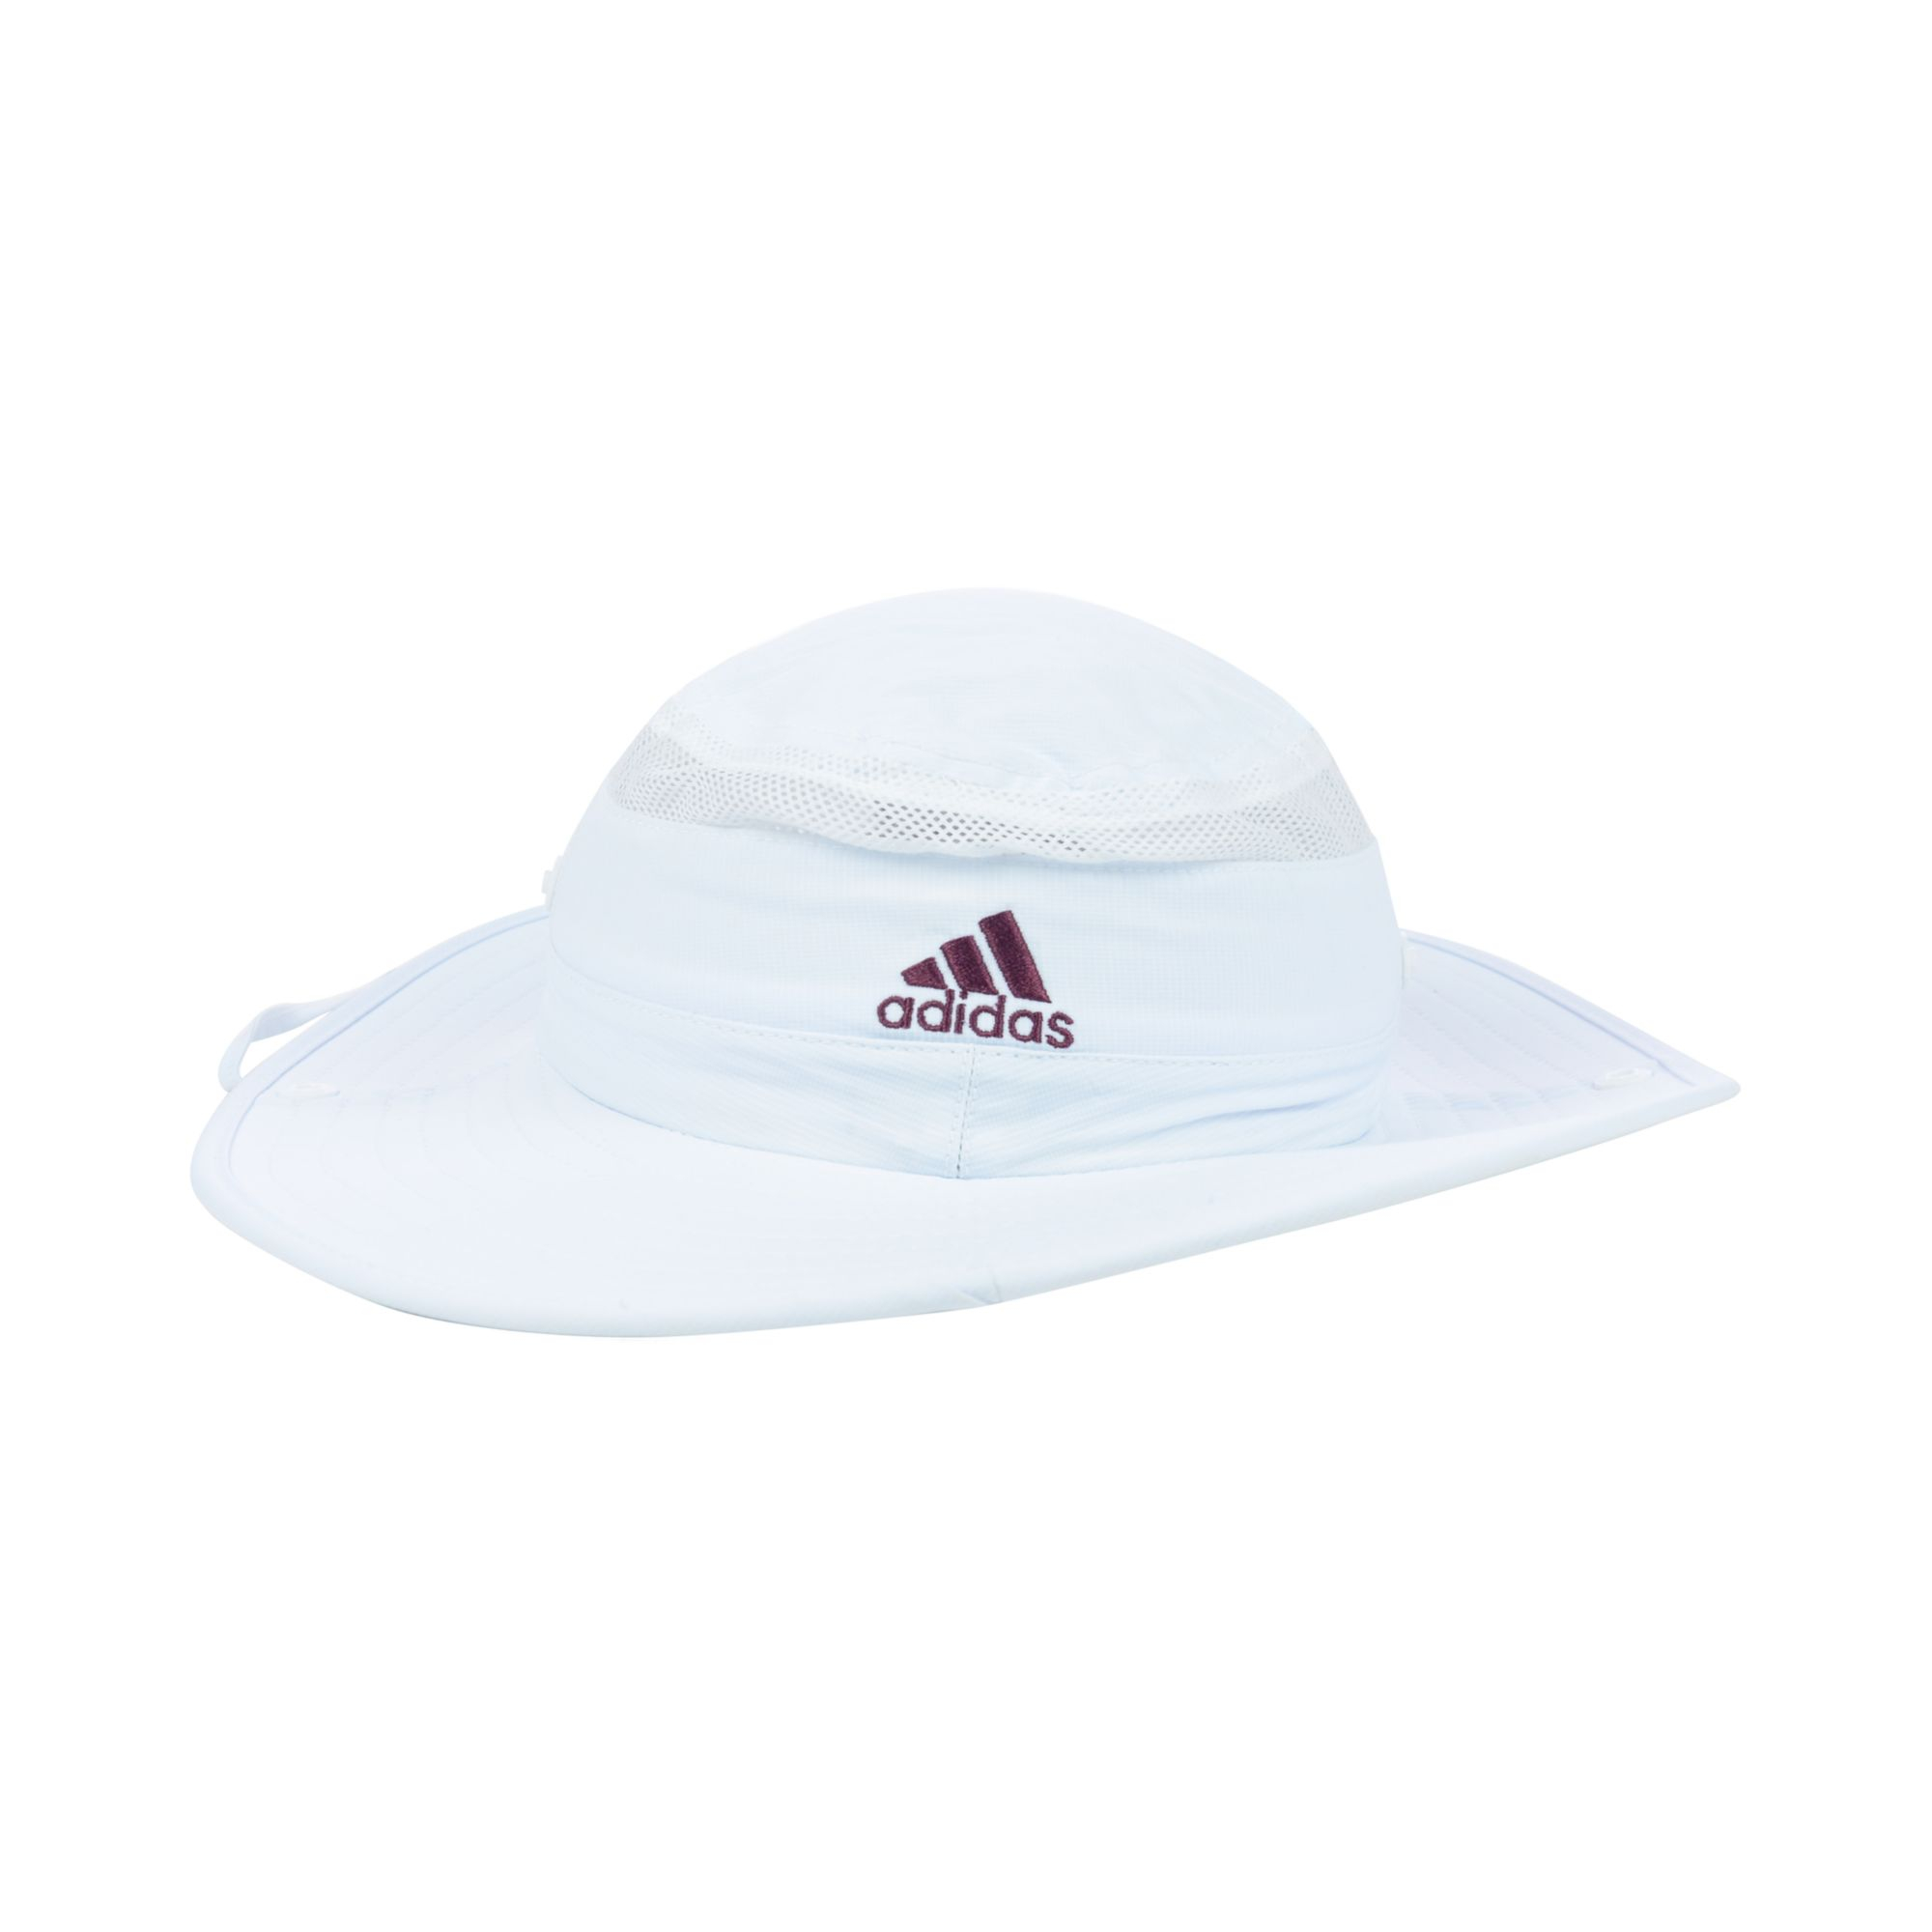 adidas white mississippi state bulldogs campus safari hat product 1 22351628 4 704948068 normal